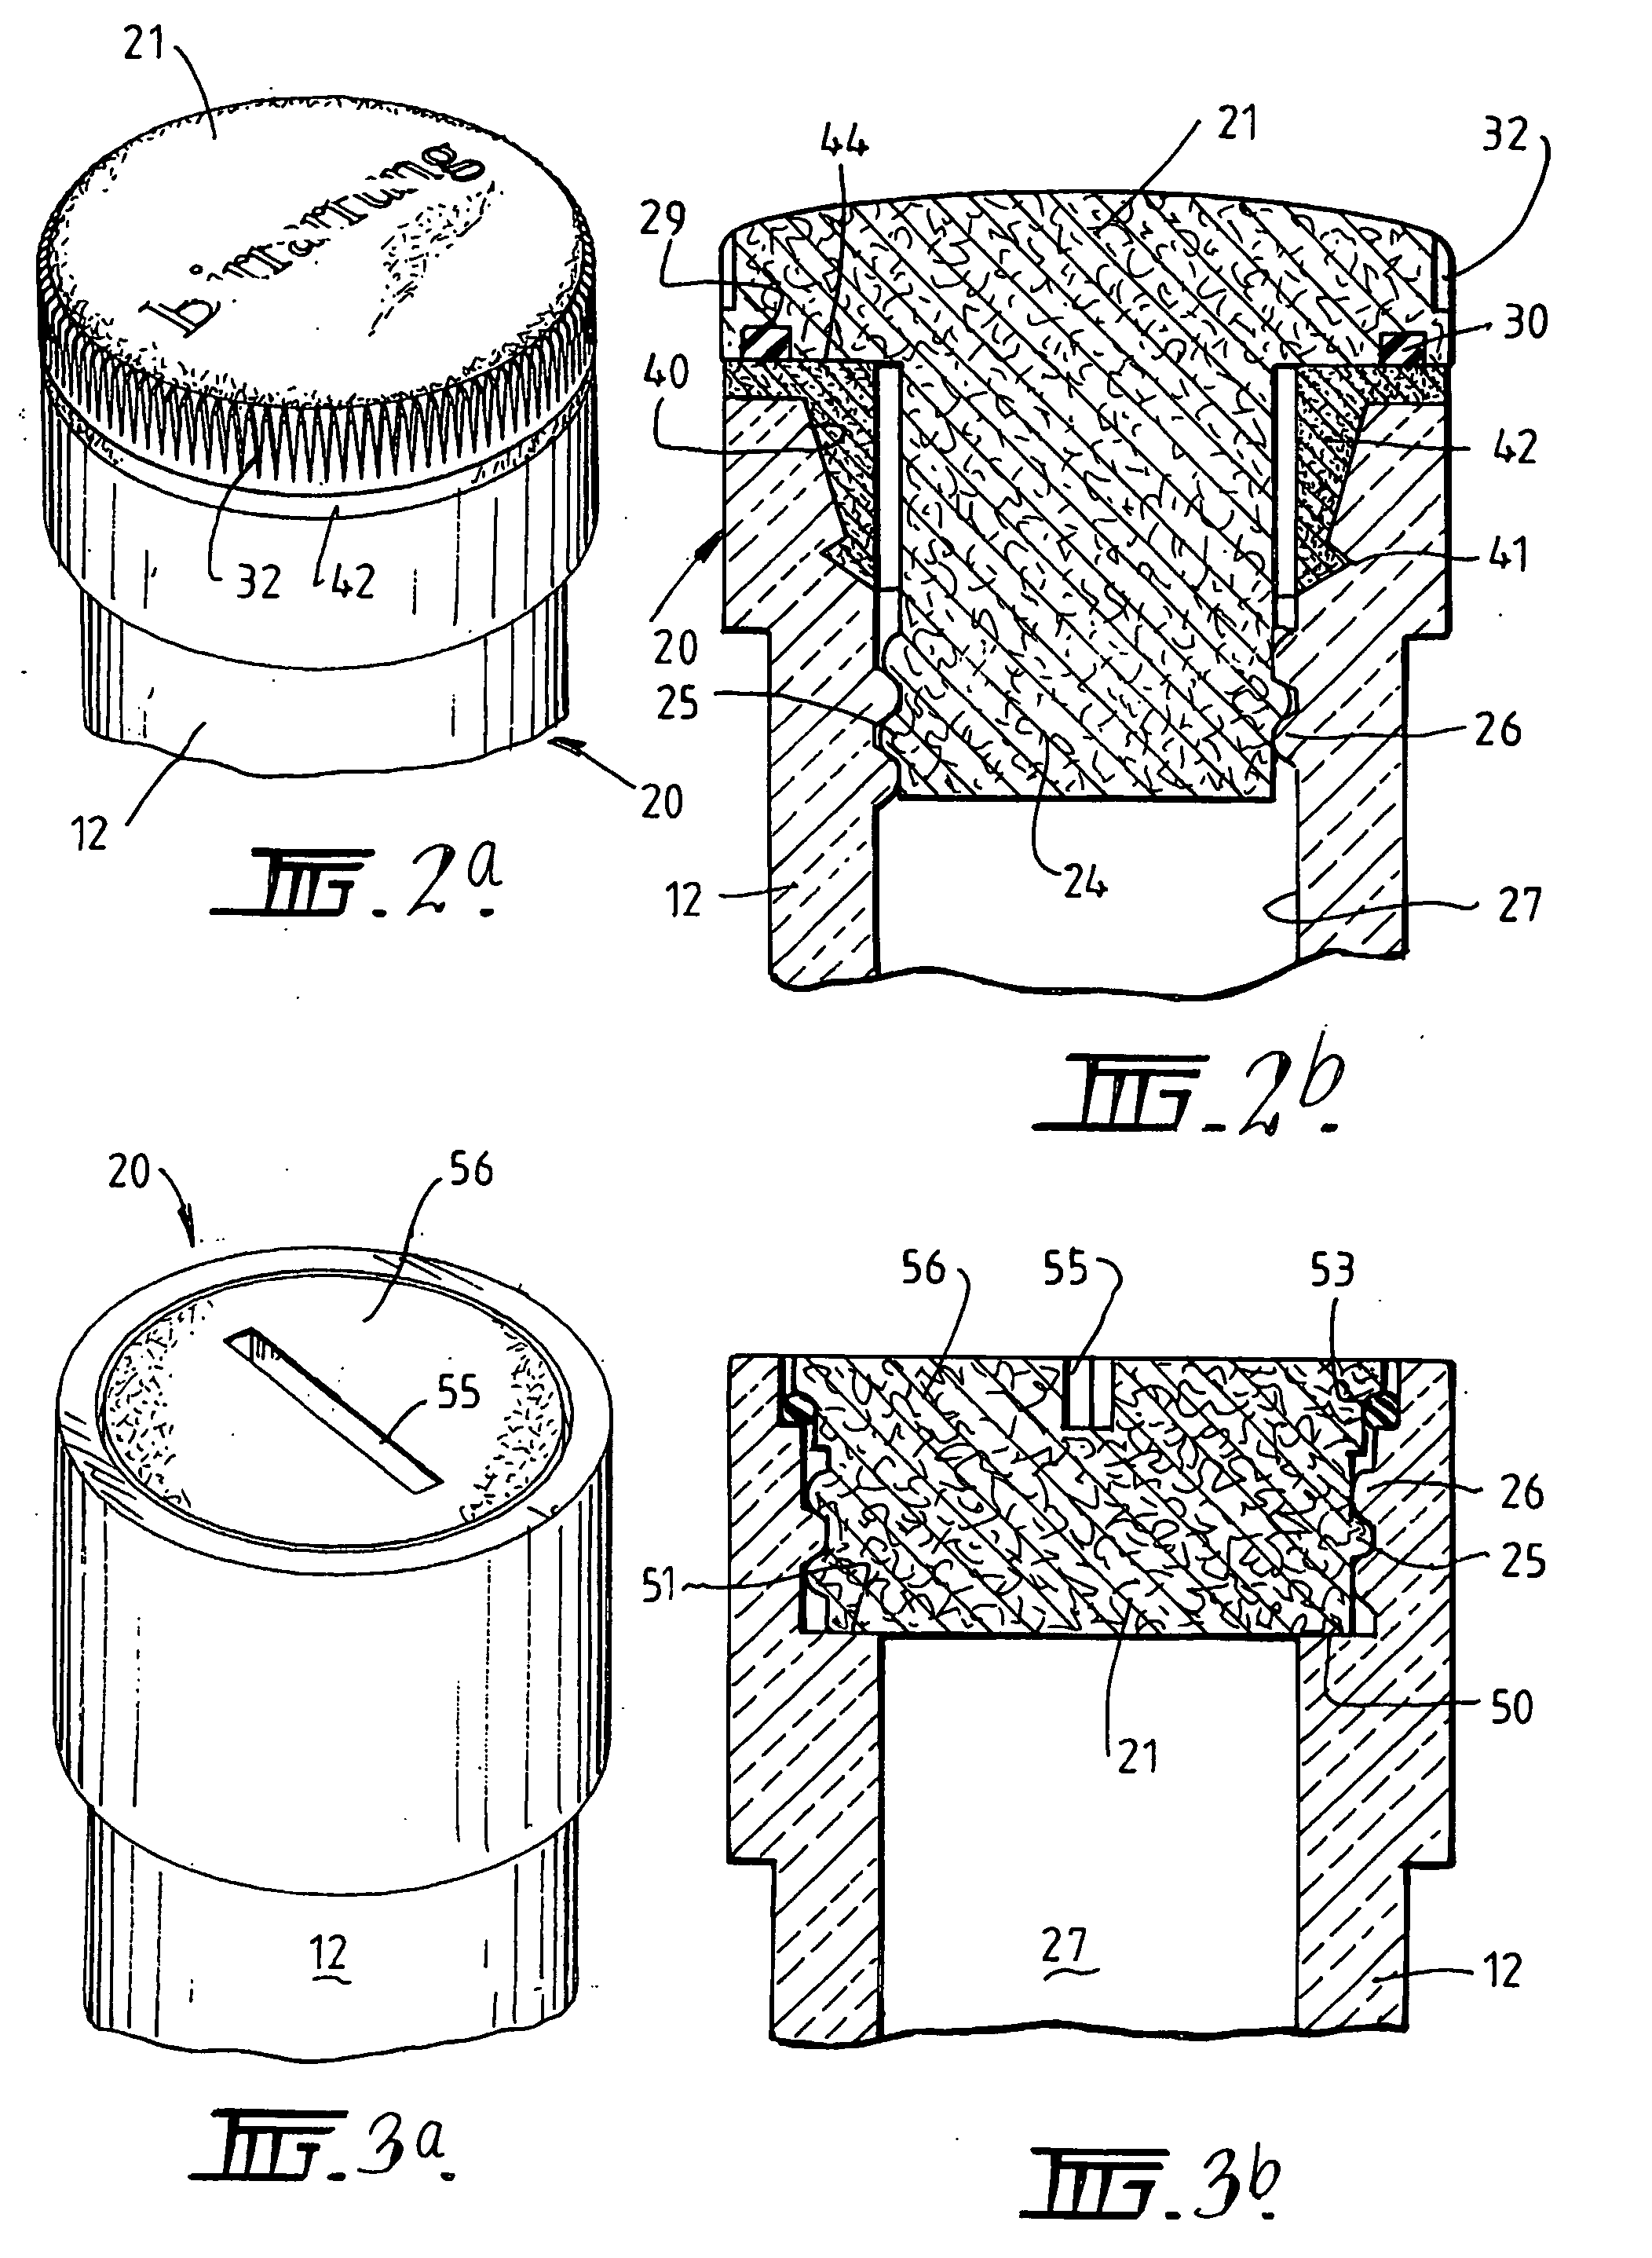 Closure or stopper forms a surface tension seal